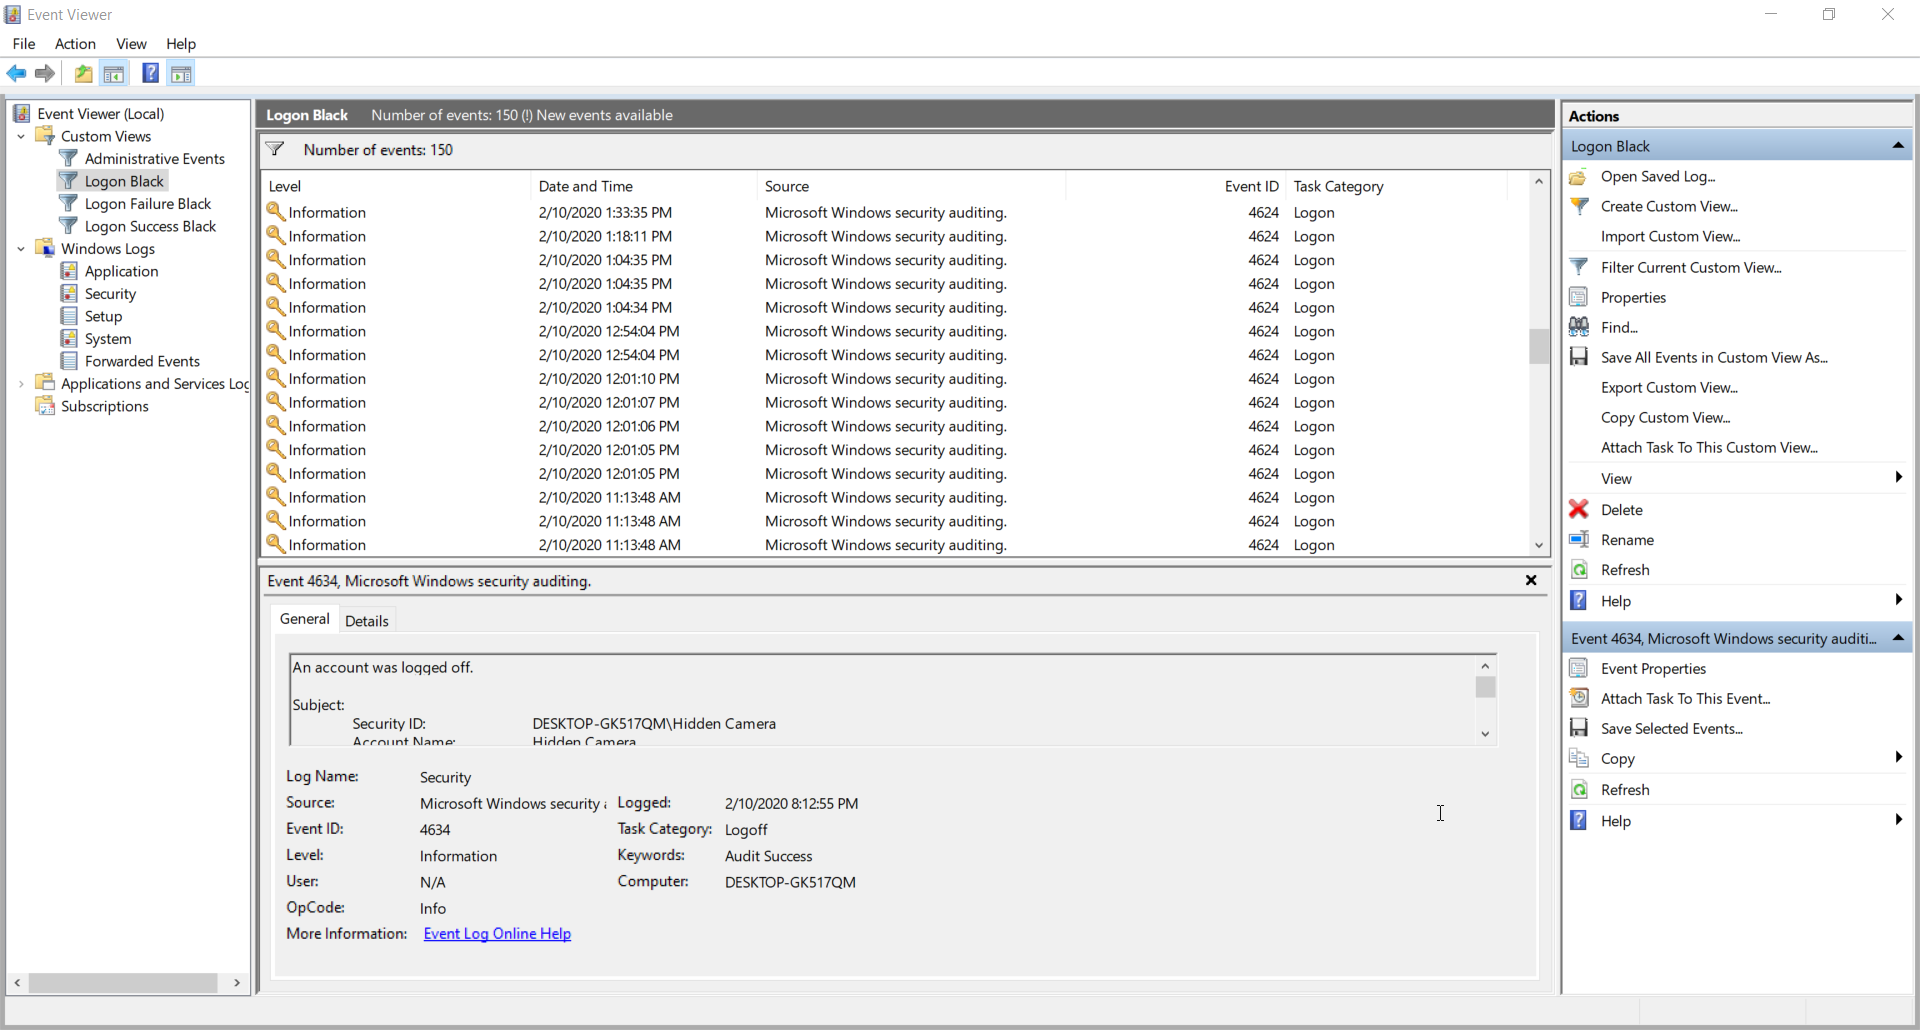 Multiple Event ID 4624 in Event Viewer bc42d9c8-c573-4814-86b5-c778f2596fd6?upload=true.png